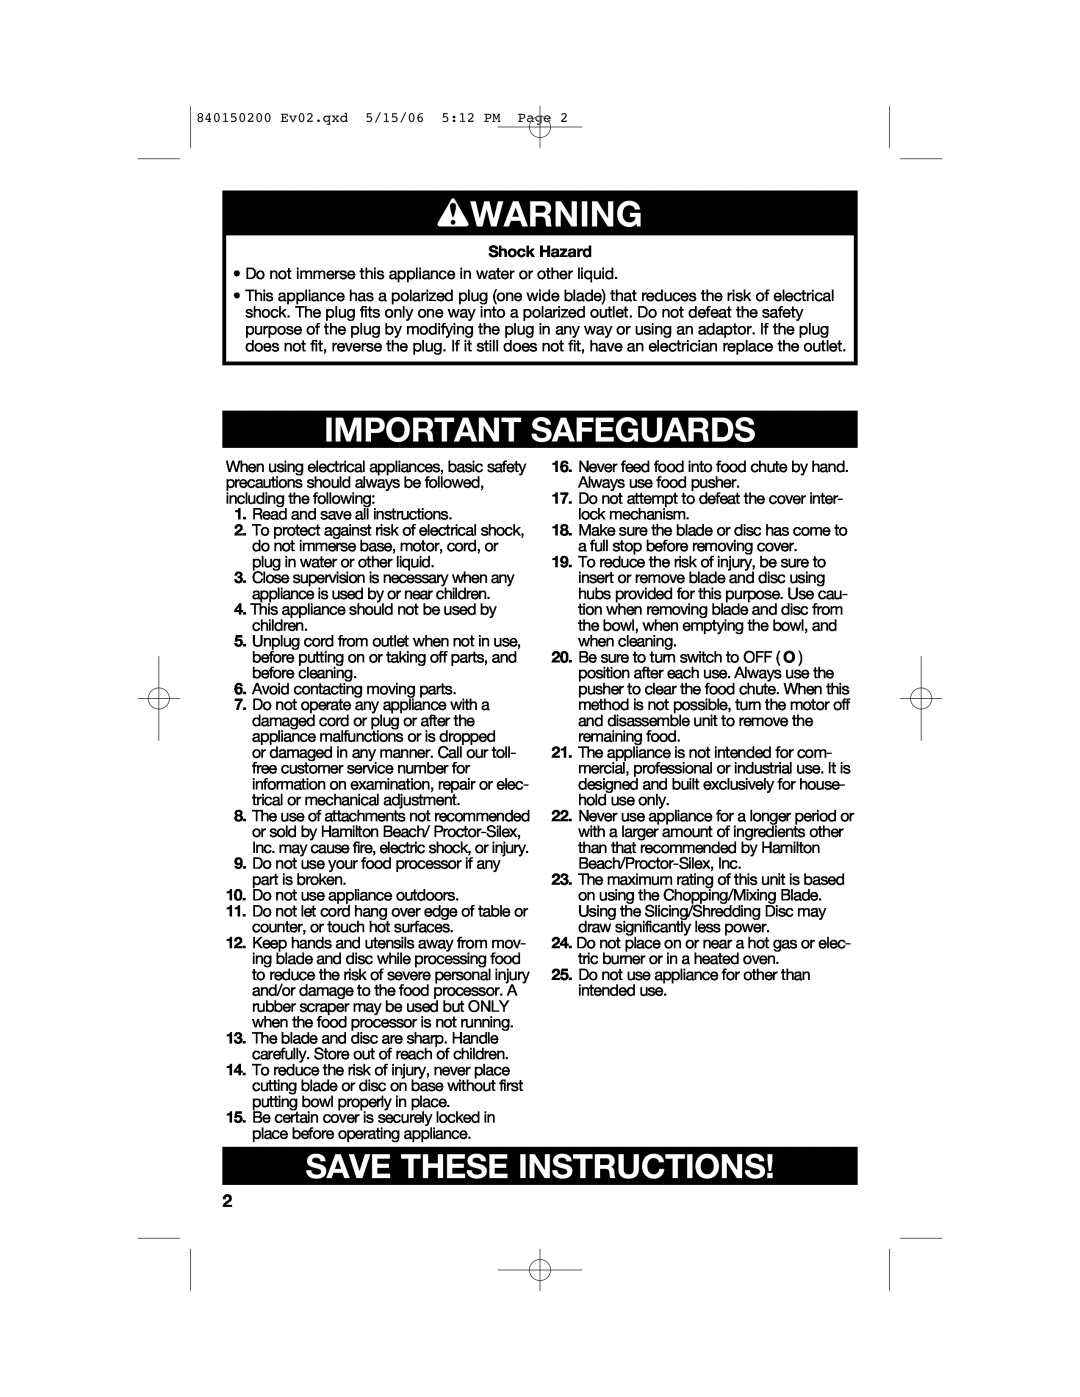 Proctor-Silex 840150200 manual wWARNING, Important Safeguards, Save These Instructions 